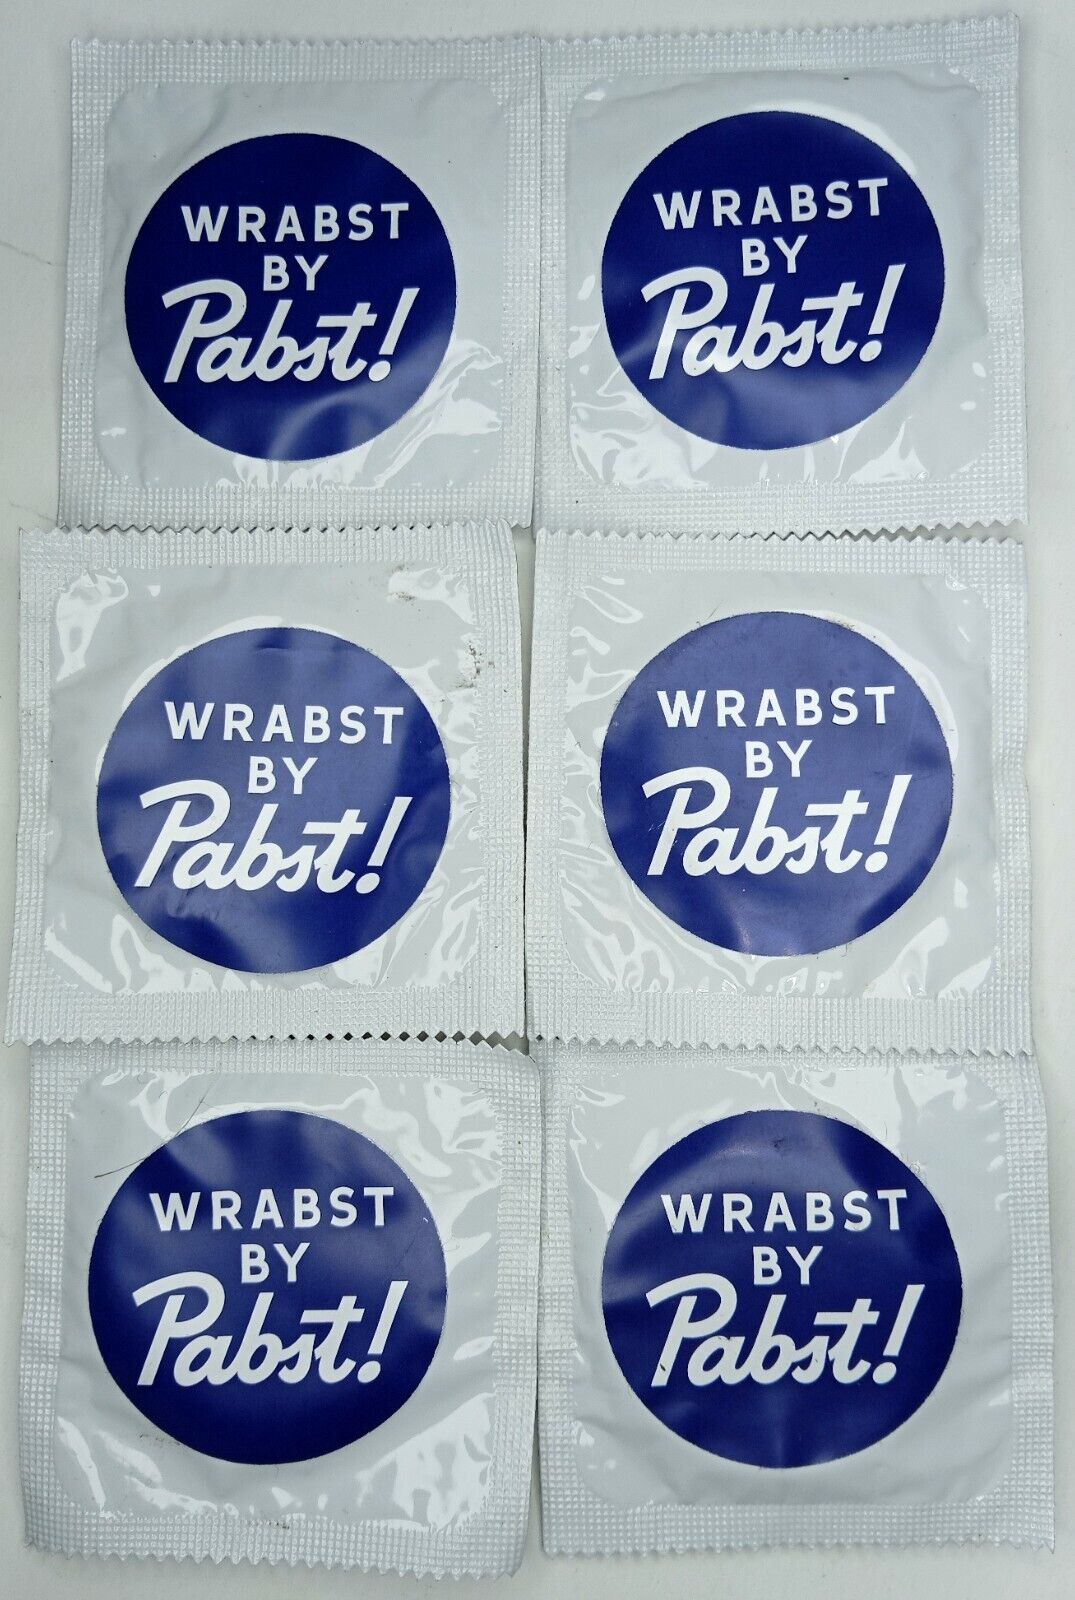  PABST BLE RIBBON PROMOTIONAL Pabst Blue Ribbon Beer Collectible CONDOM 6 PACK